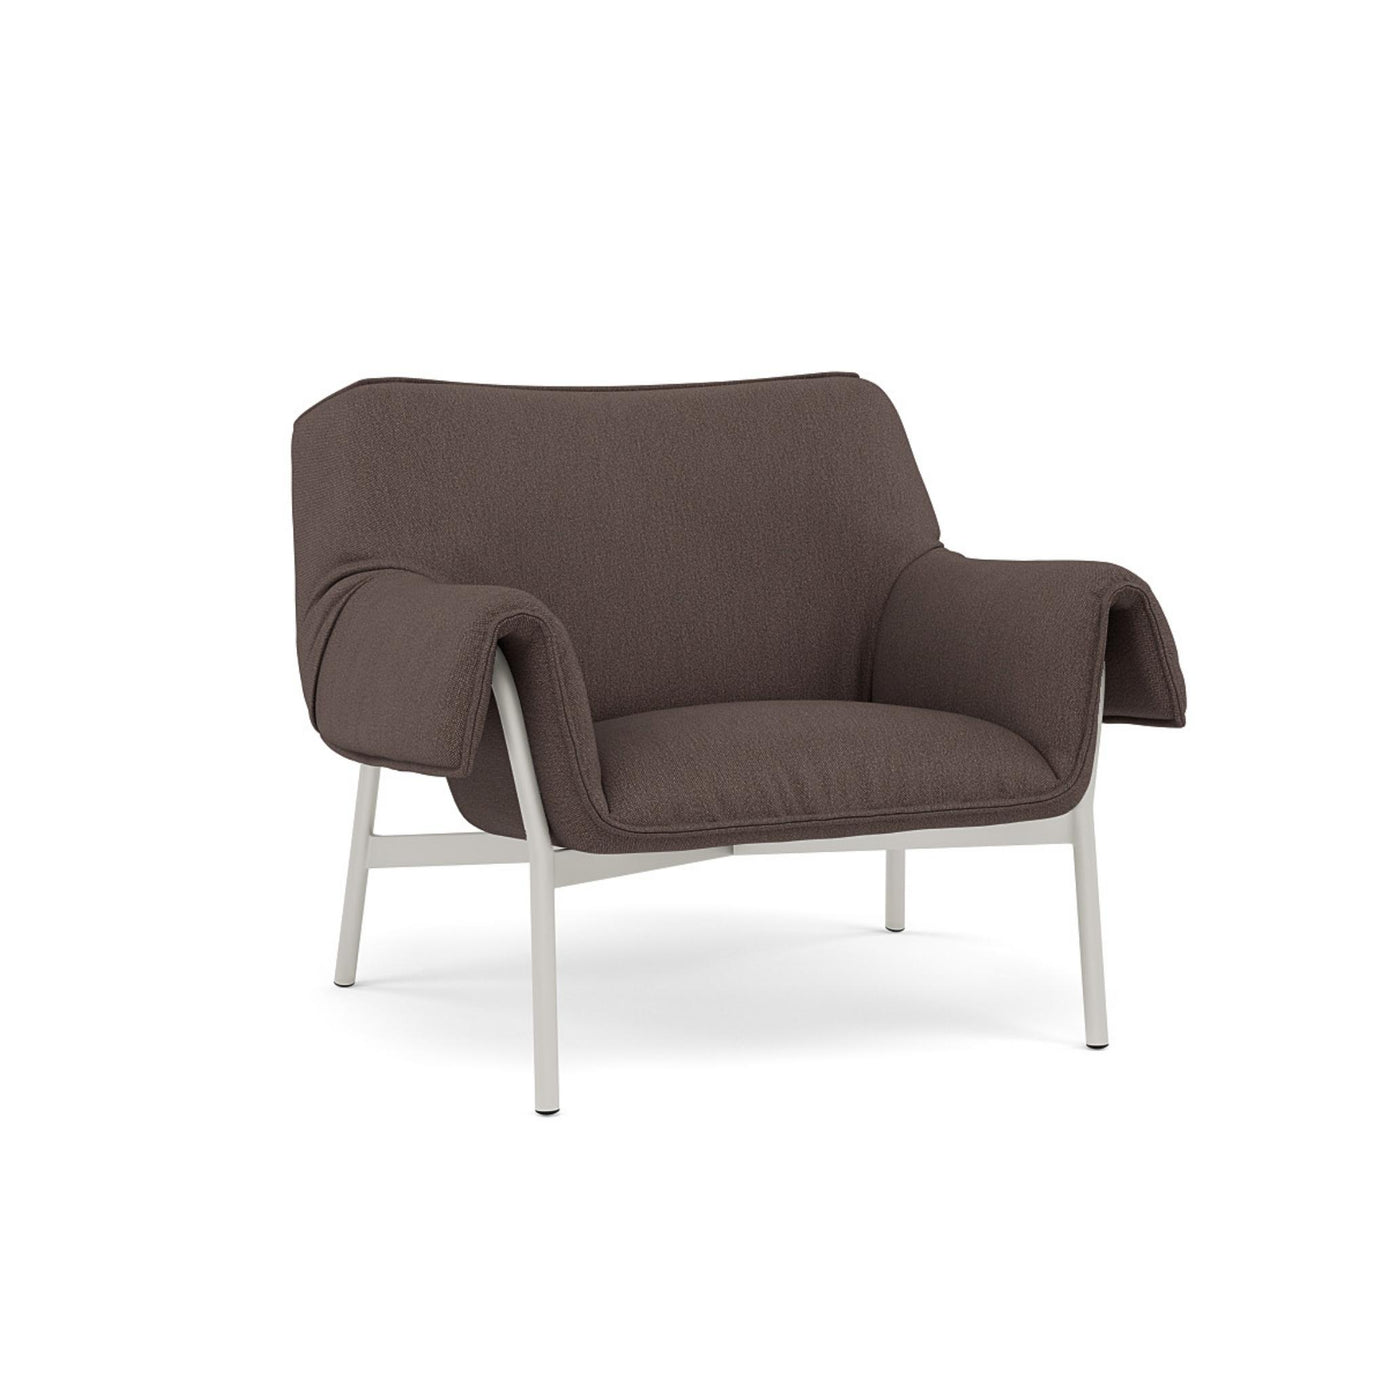 Muuto Wrap Lounge Chair. Made to order from someday designs. #colour_clay-6-red-brown